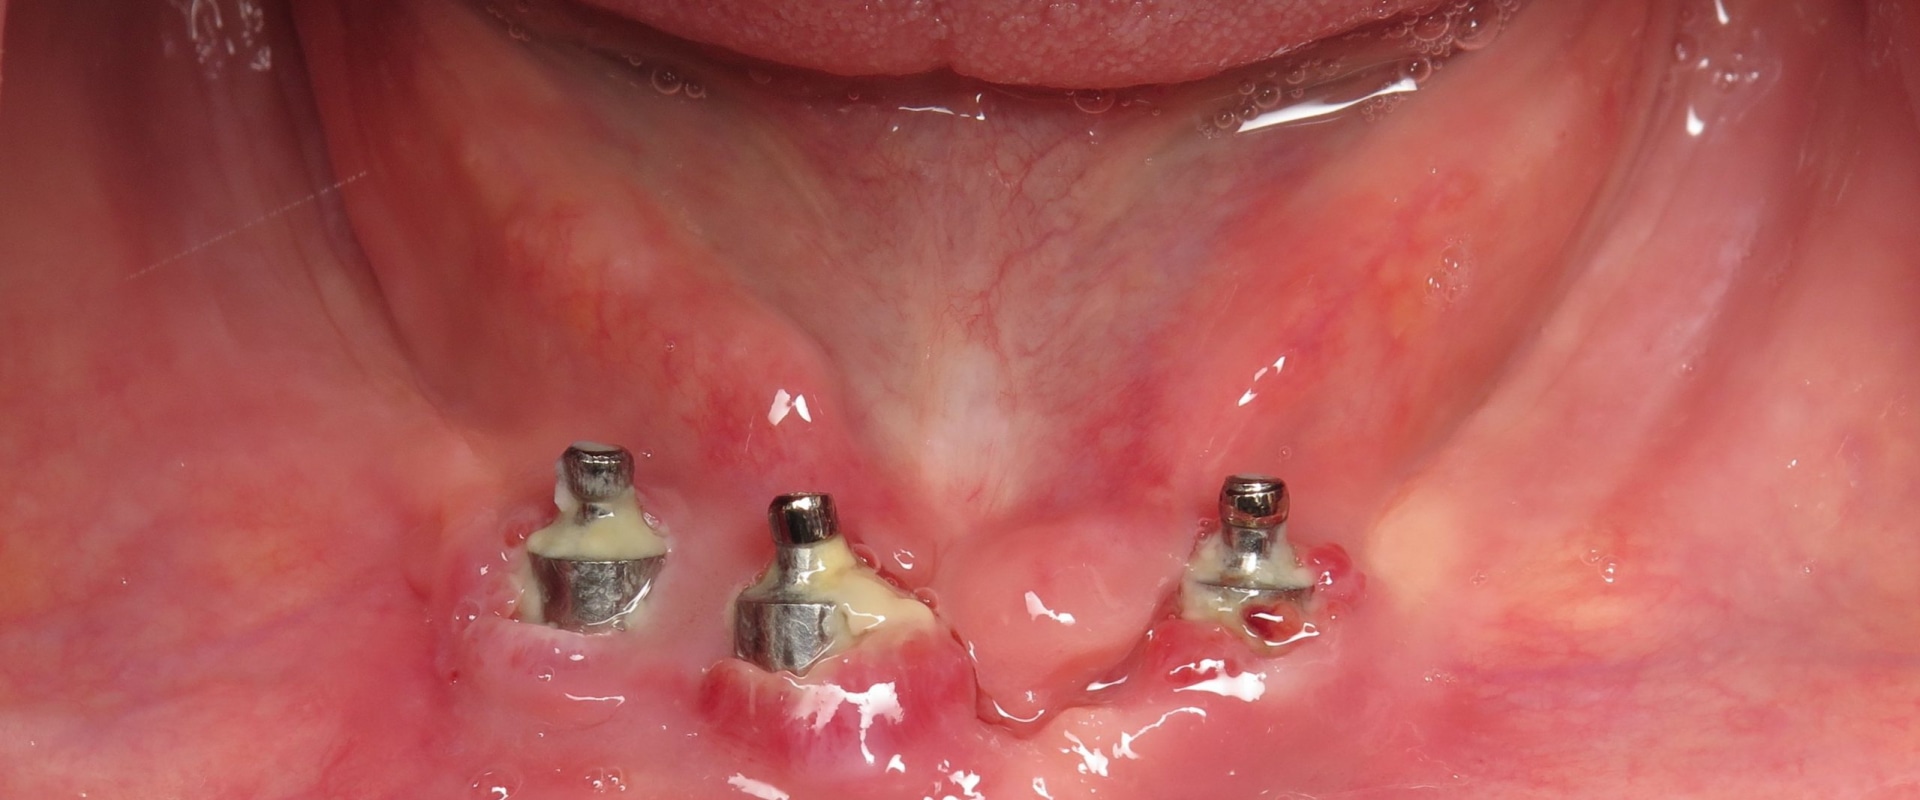 What does an infected dental implant feel like?